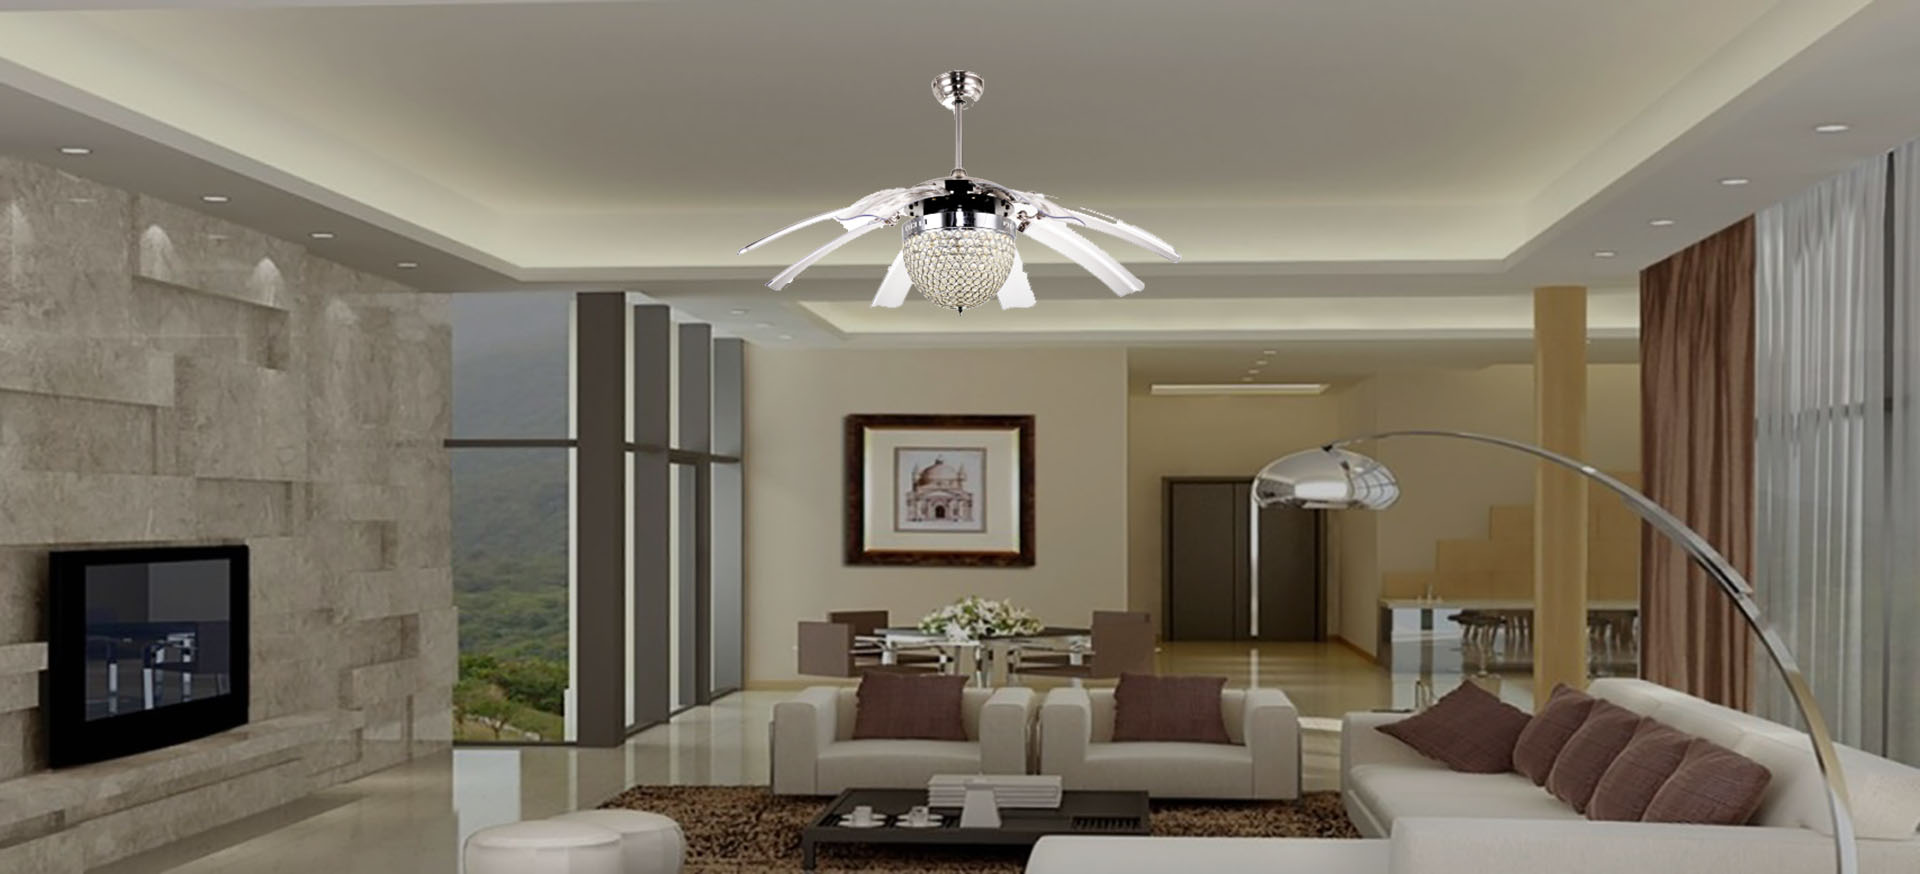 Get The Designer Wall Fans Online By Luminous